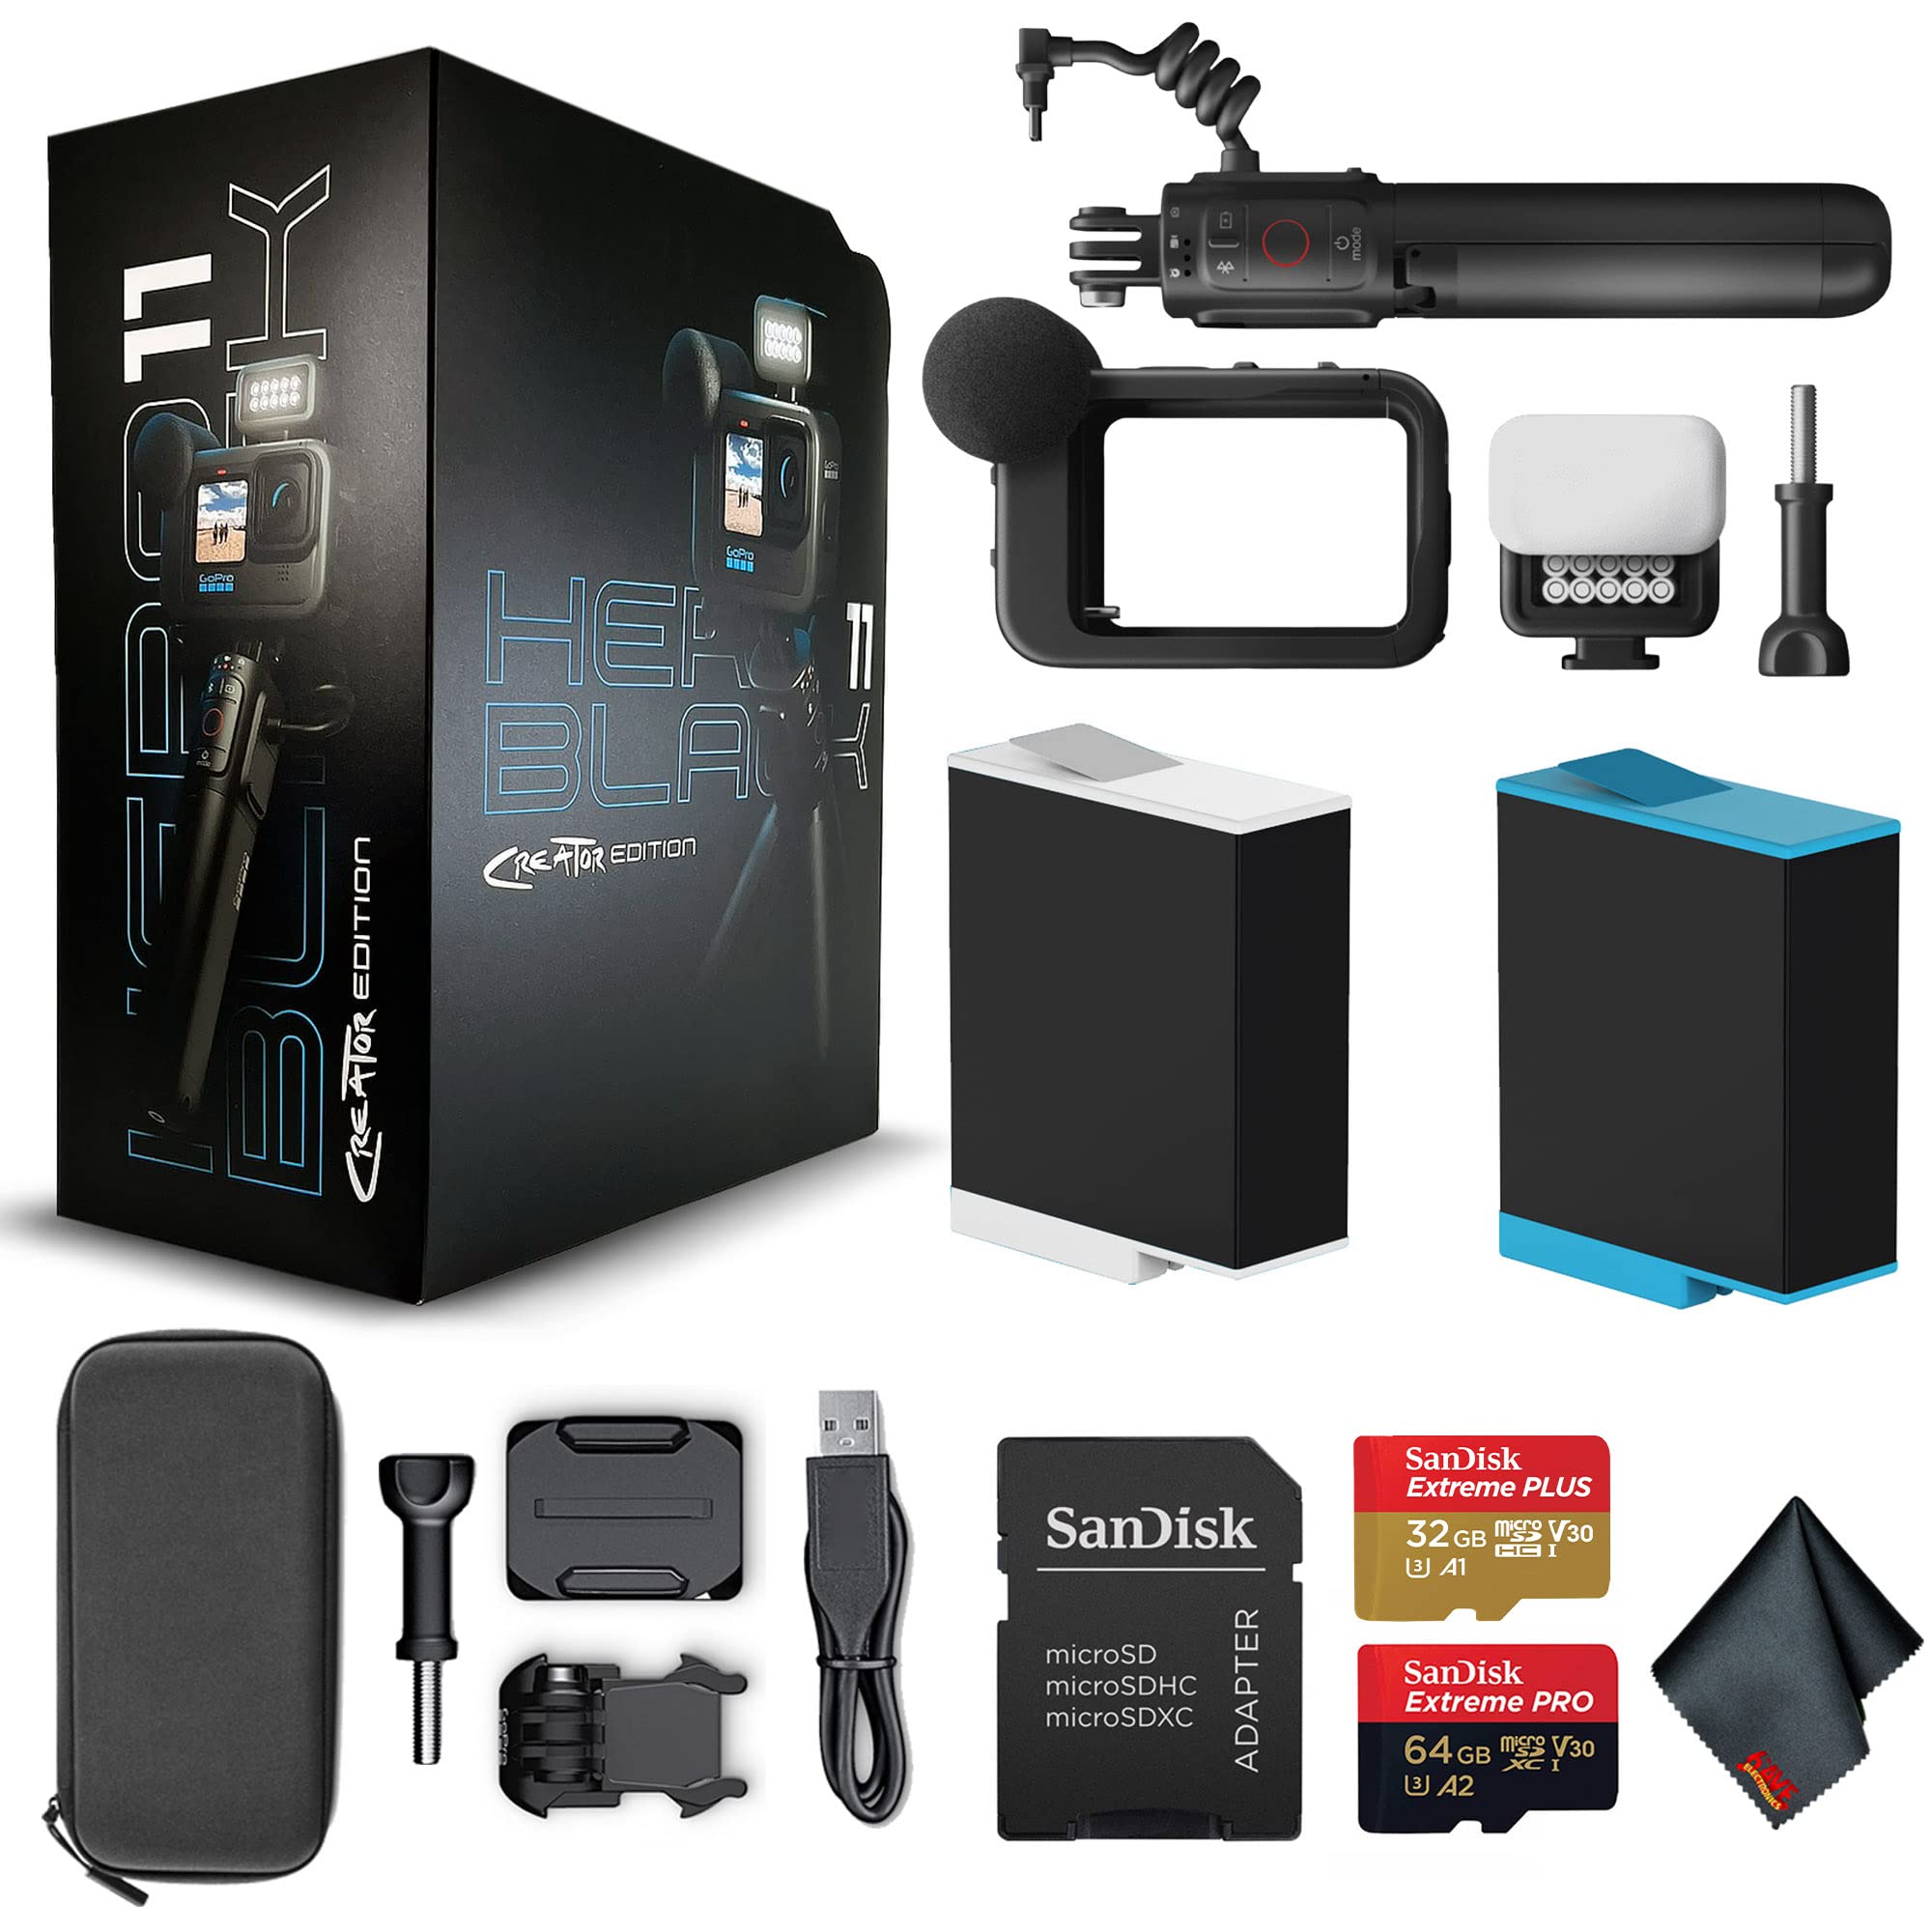 GoPro HERO11 Black Creator Edition - Includes Volta (Battery Grip, Tripod, Remote), Media Mod, Light Mod, Enduro Battery - Waterproof Action Camera + 64GB Extreme Pro Card and Extra Battery